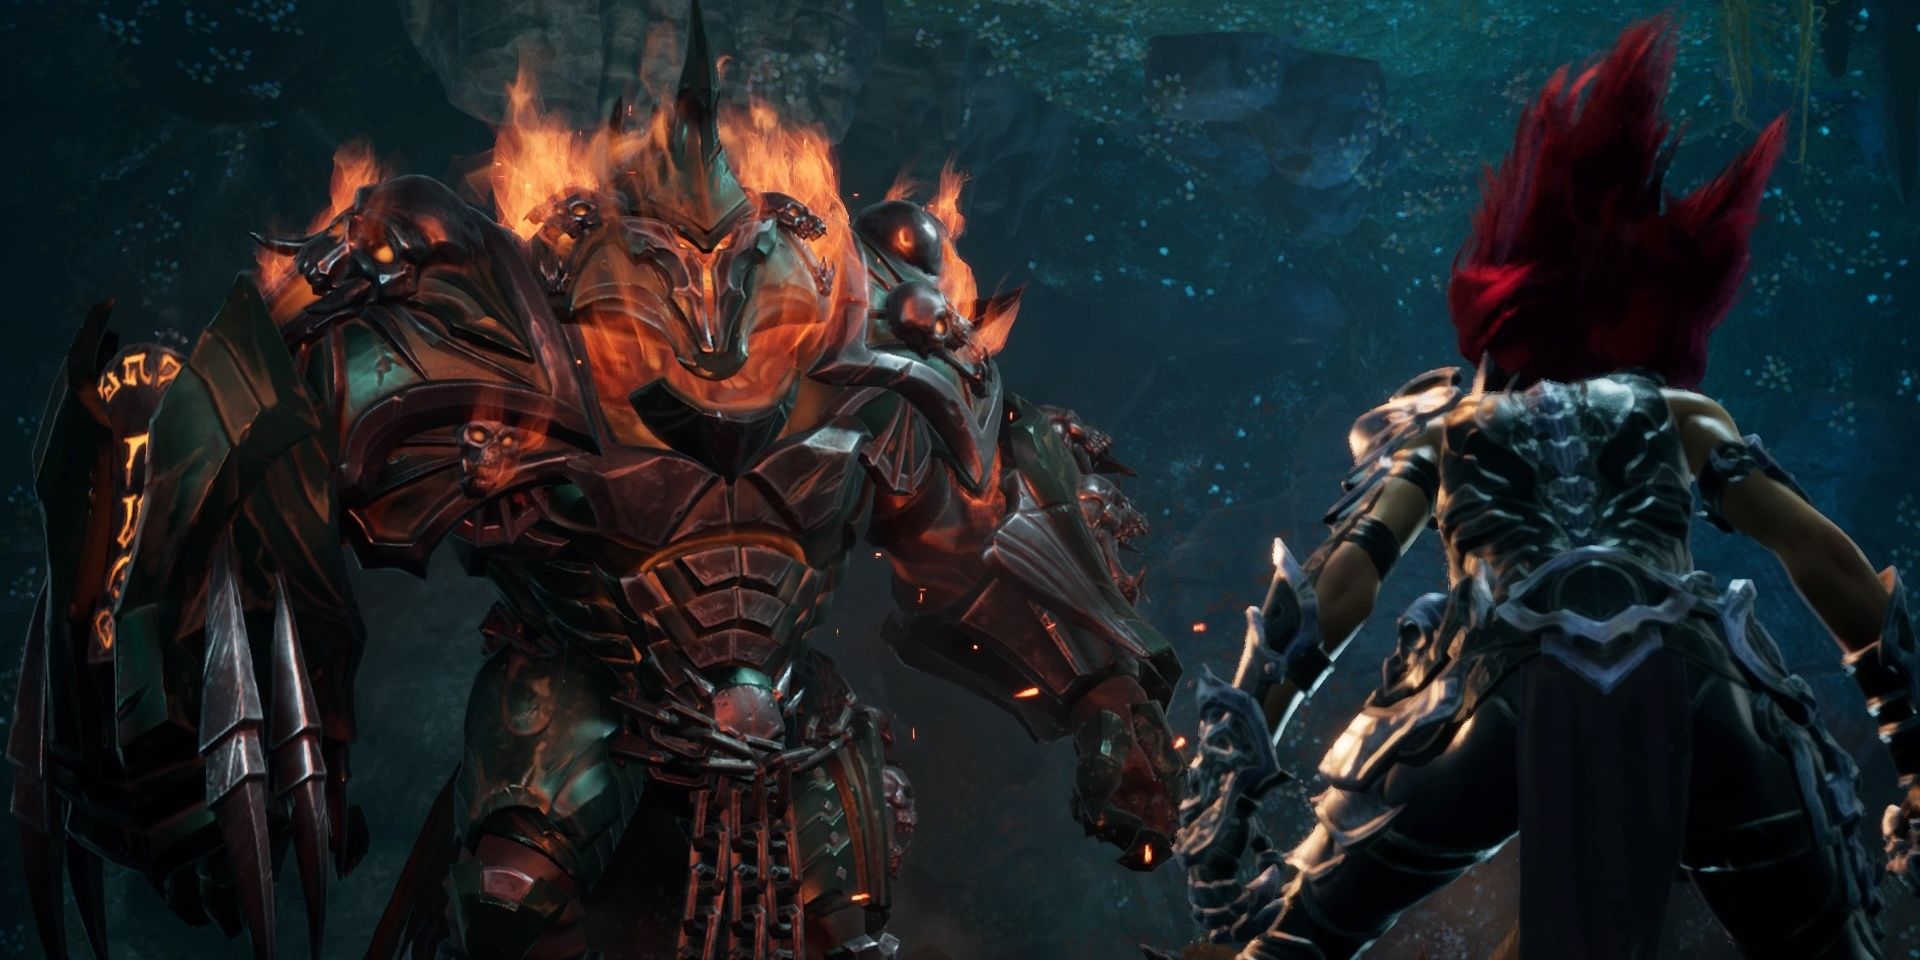 Fury and an enemy in Darksiders III